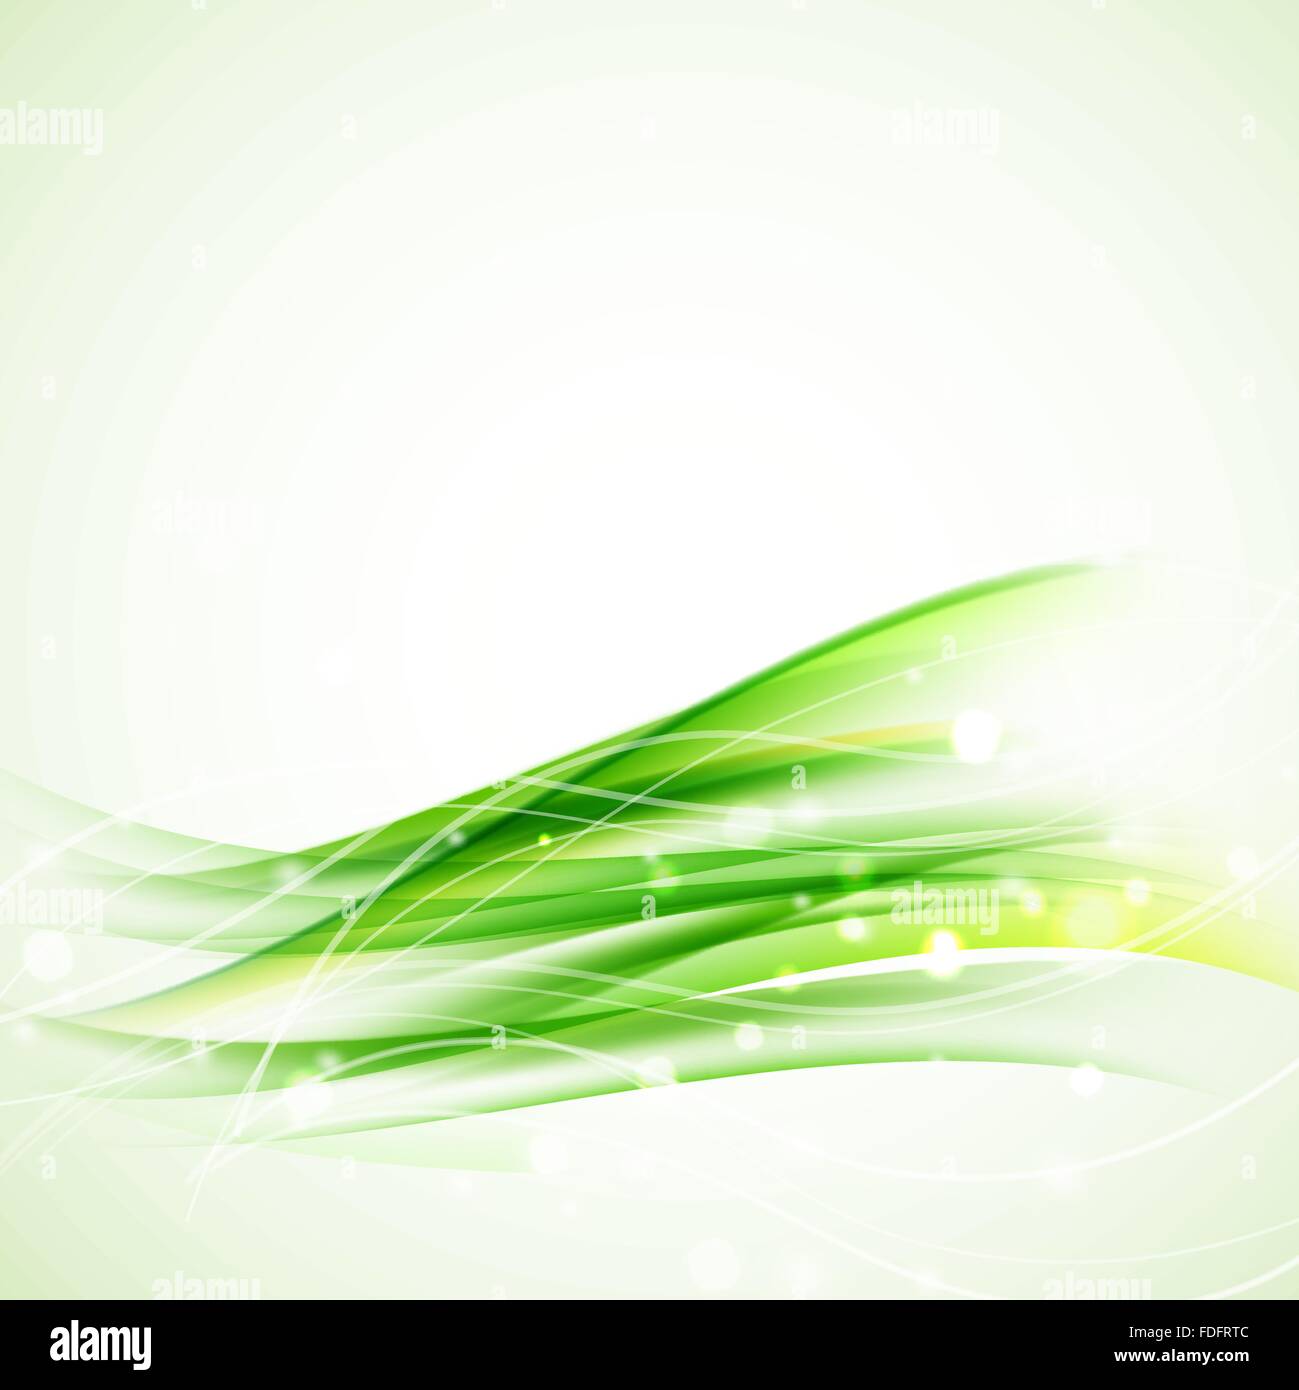 green abstract wavy background with sparkles and glittering design elements. vector Stock Vector